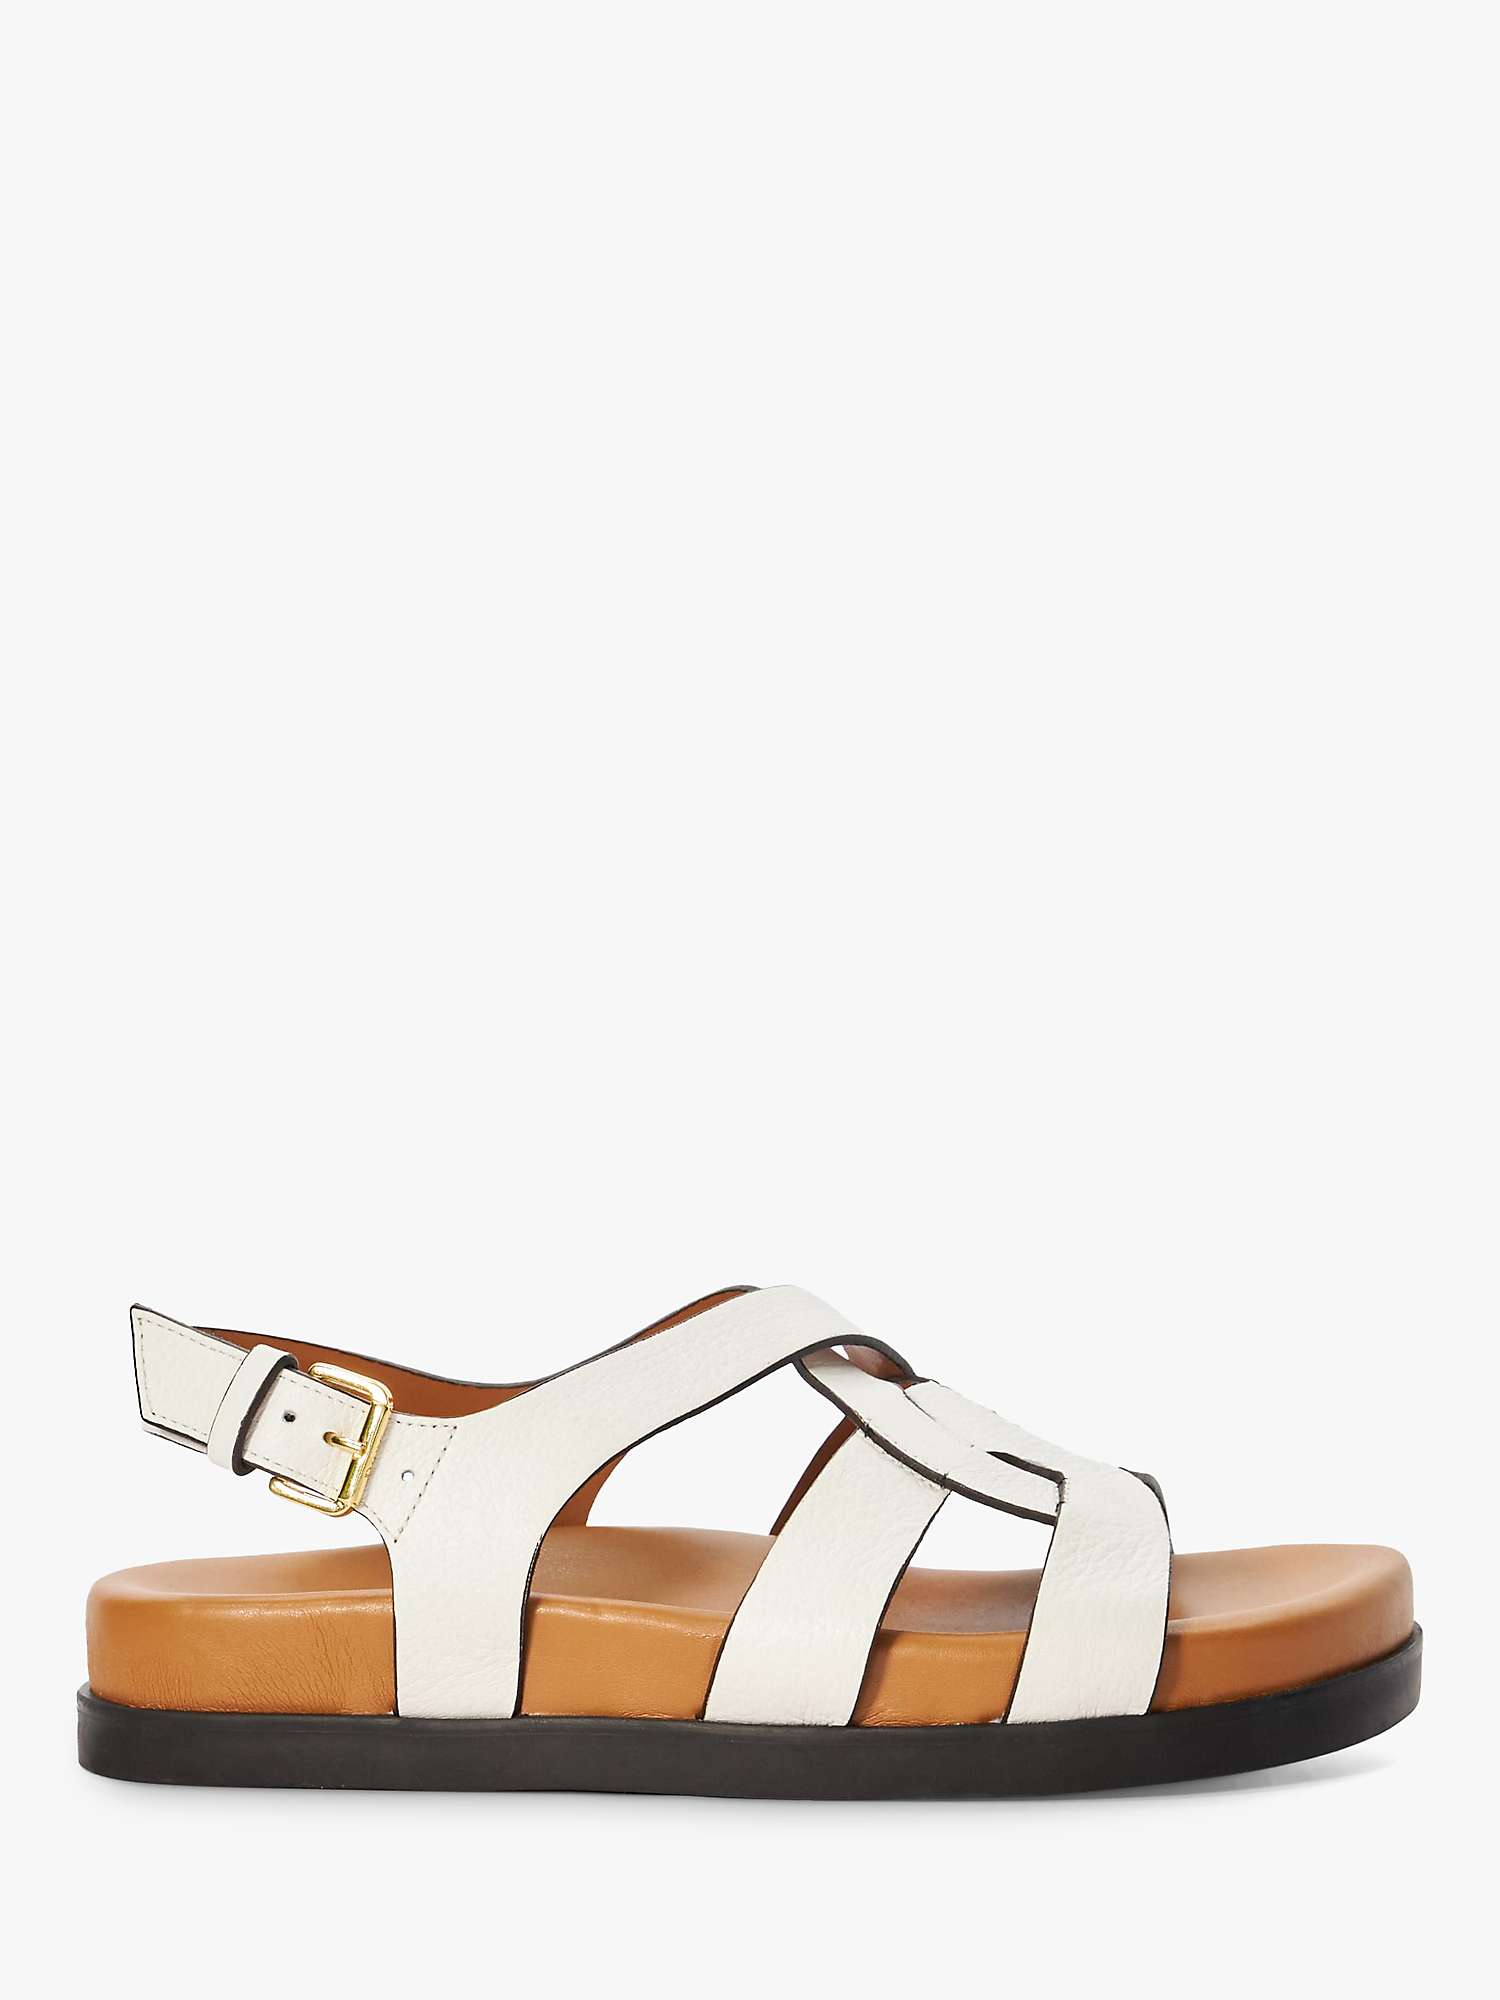 Buy Dune Loupin Leather Footbed Sandals, White Online at johnlewis.com